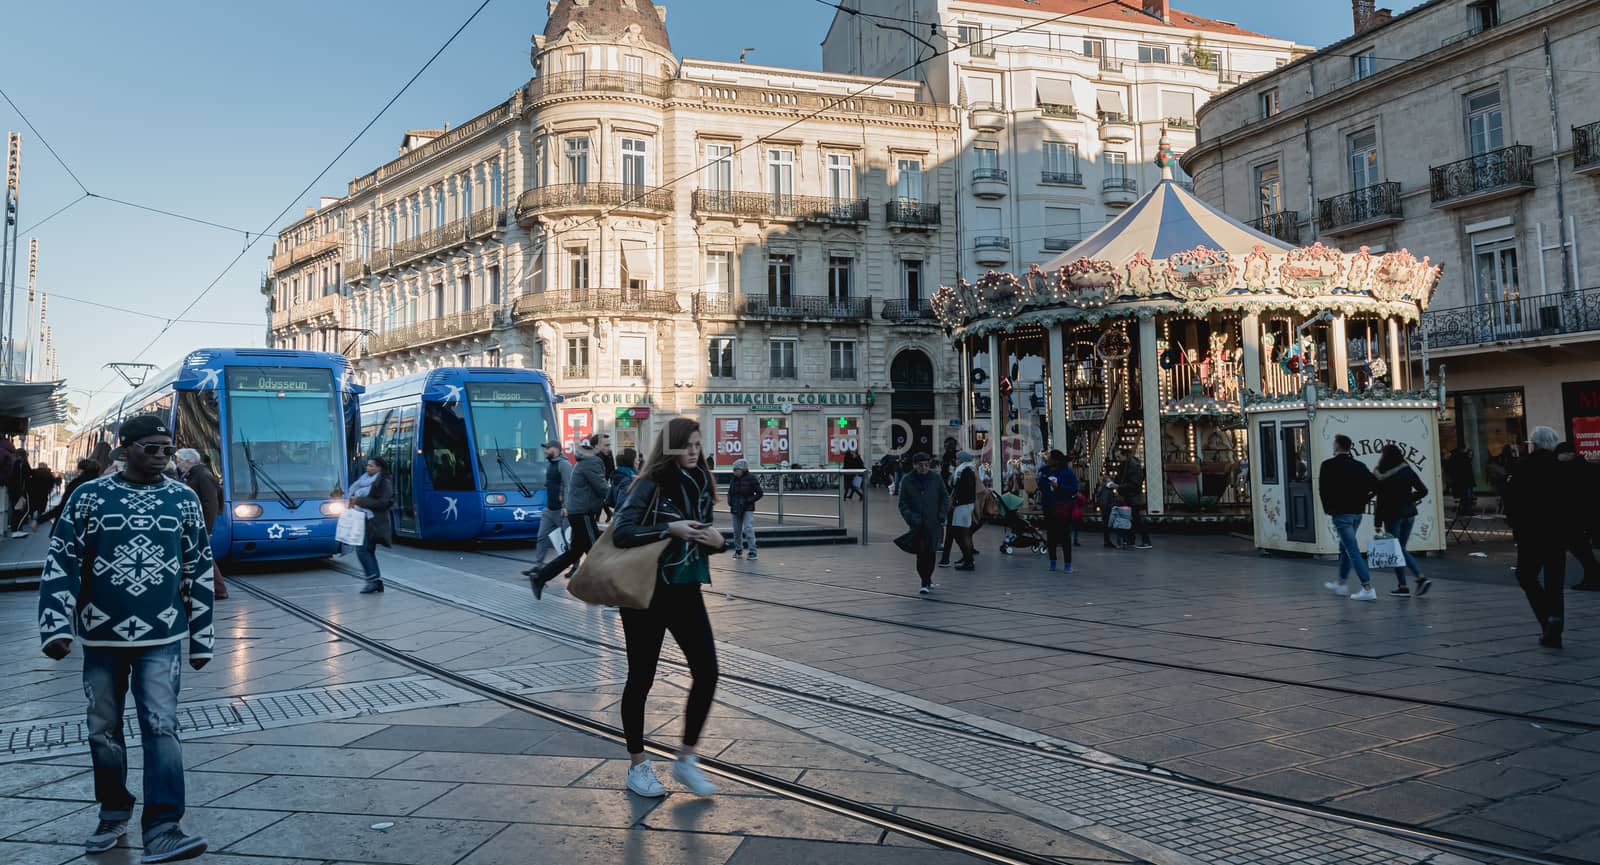 Montpellier, France - January 2, 2019: Electric tram stopped at Place de la Comedie where people pass on a winter day